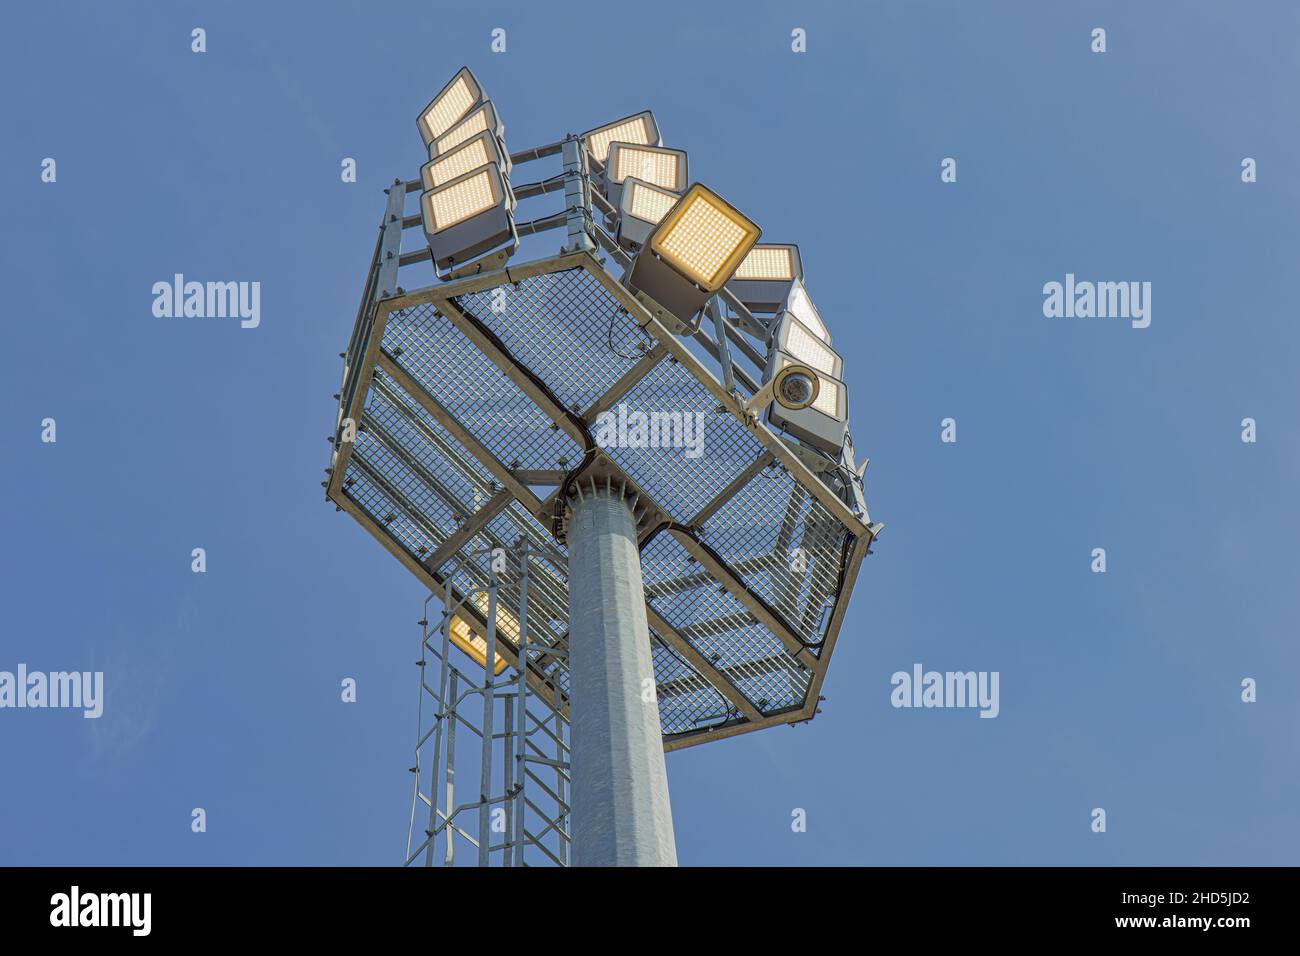 Led lighting lamp on a pole against the blue sky Stock Photo